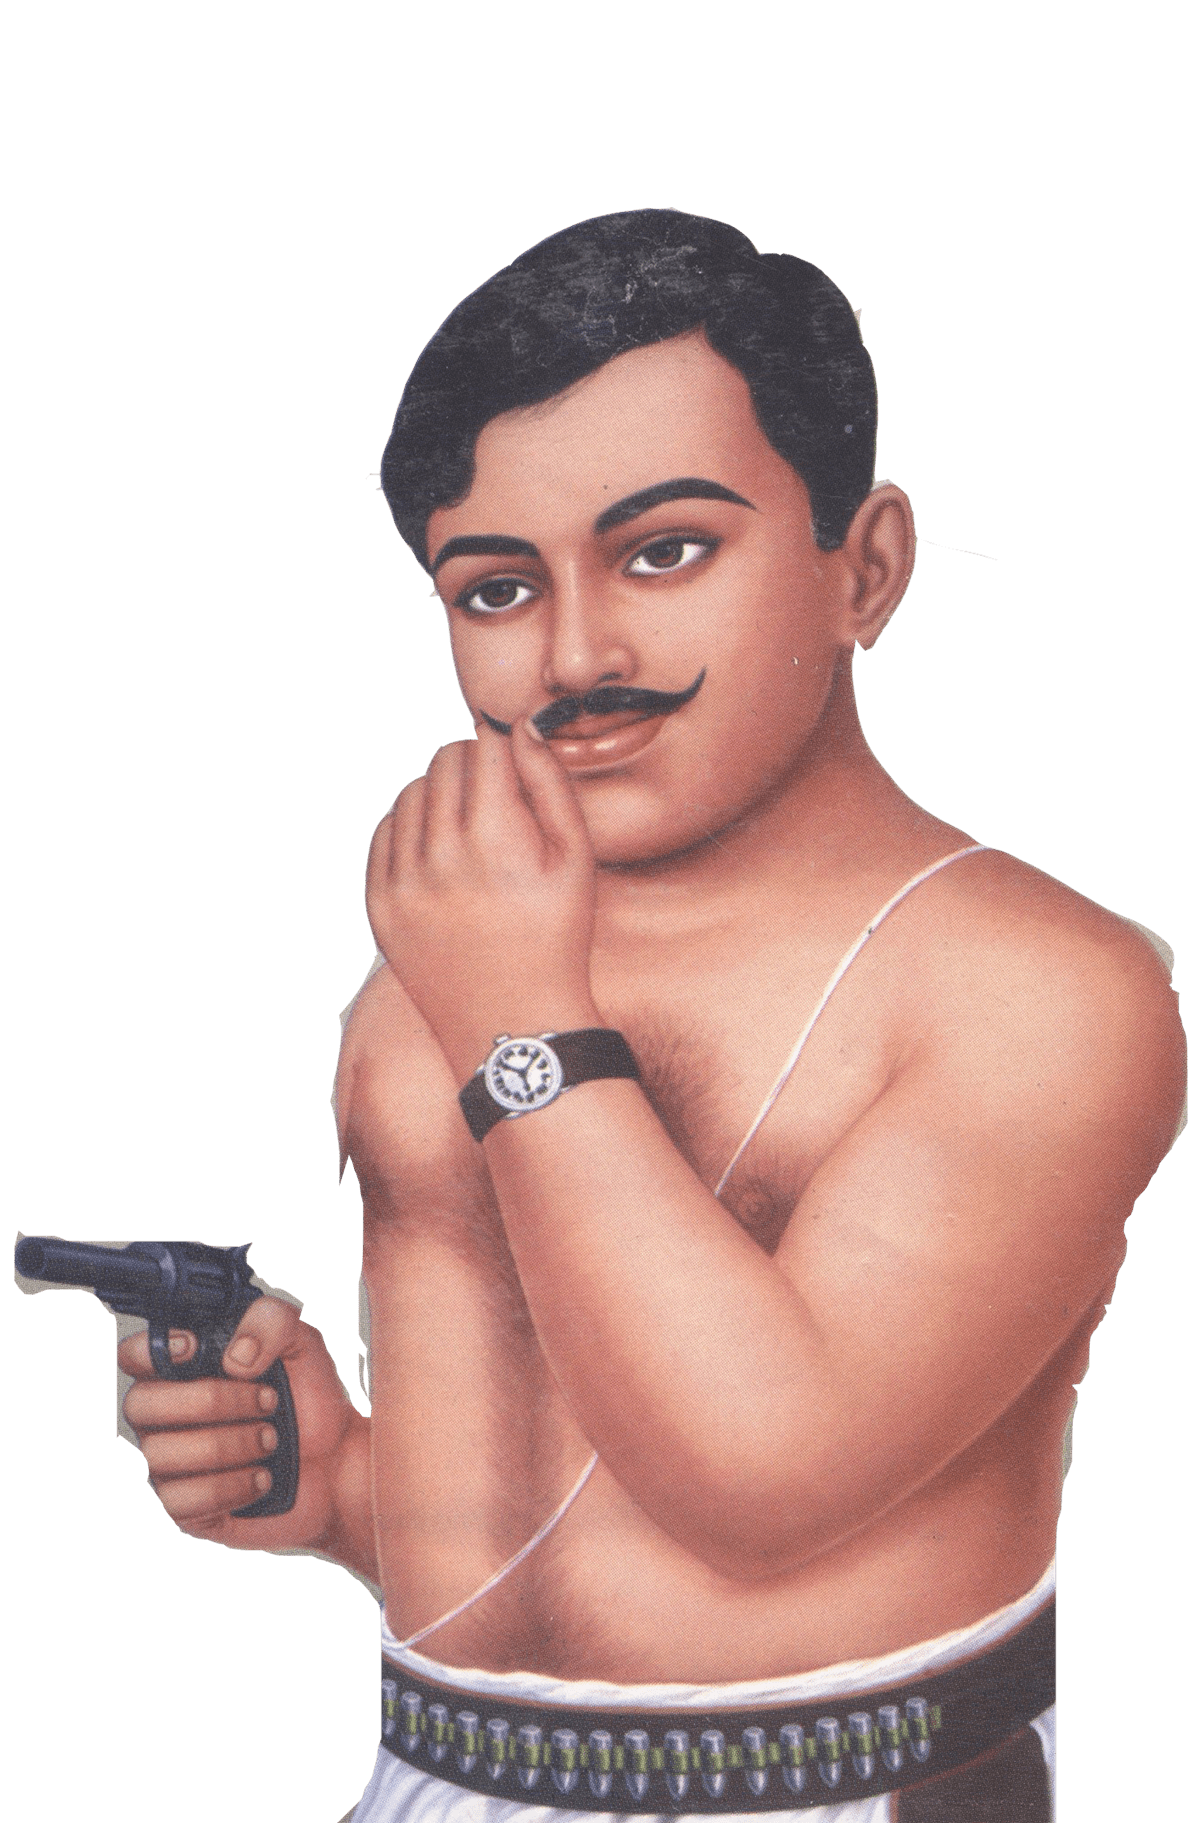 Official machinery misused in elections to favour ruling party: Chandrashekhar  Azad in Rampur